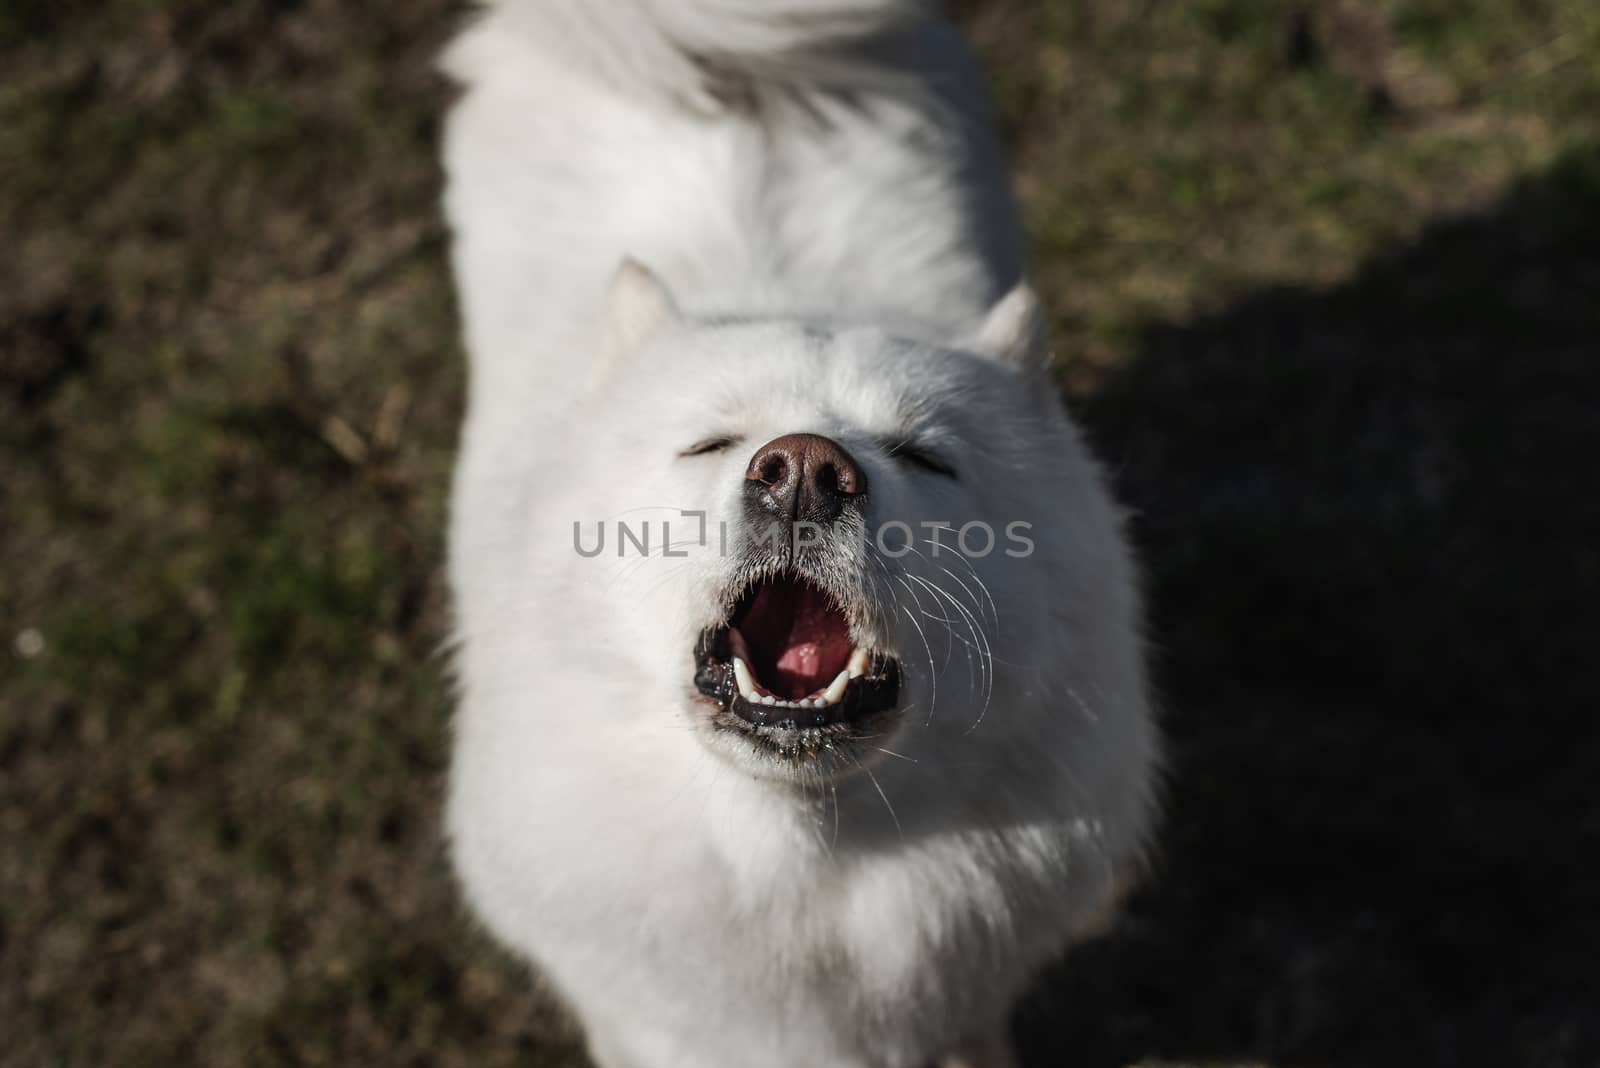 Samoyed barking, howling at camera on dirt and grass background